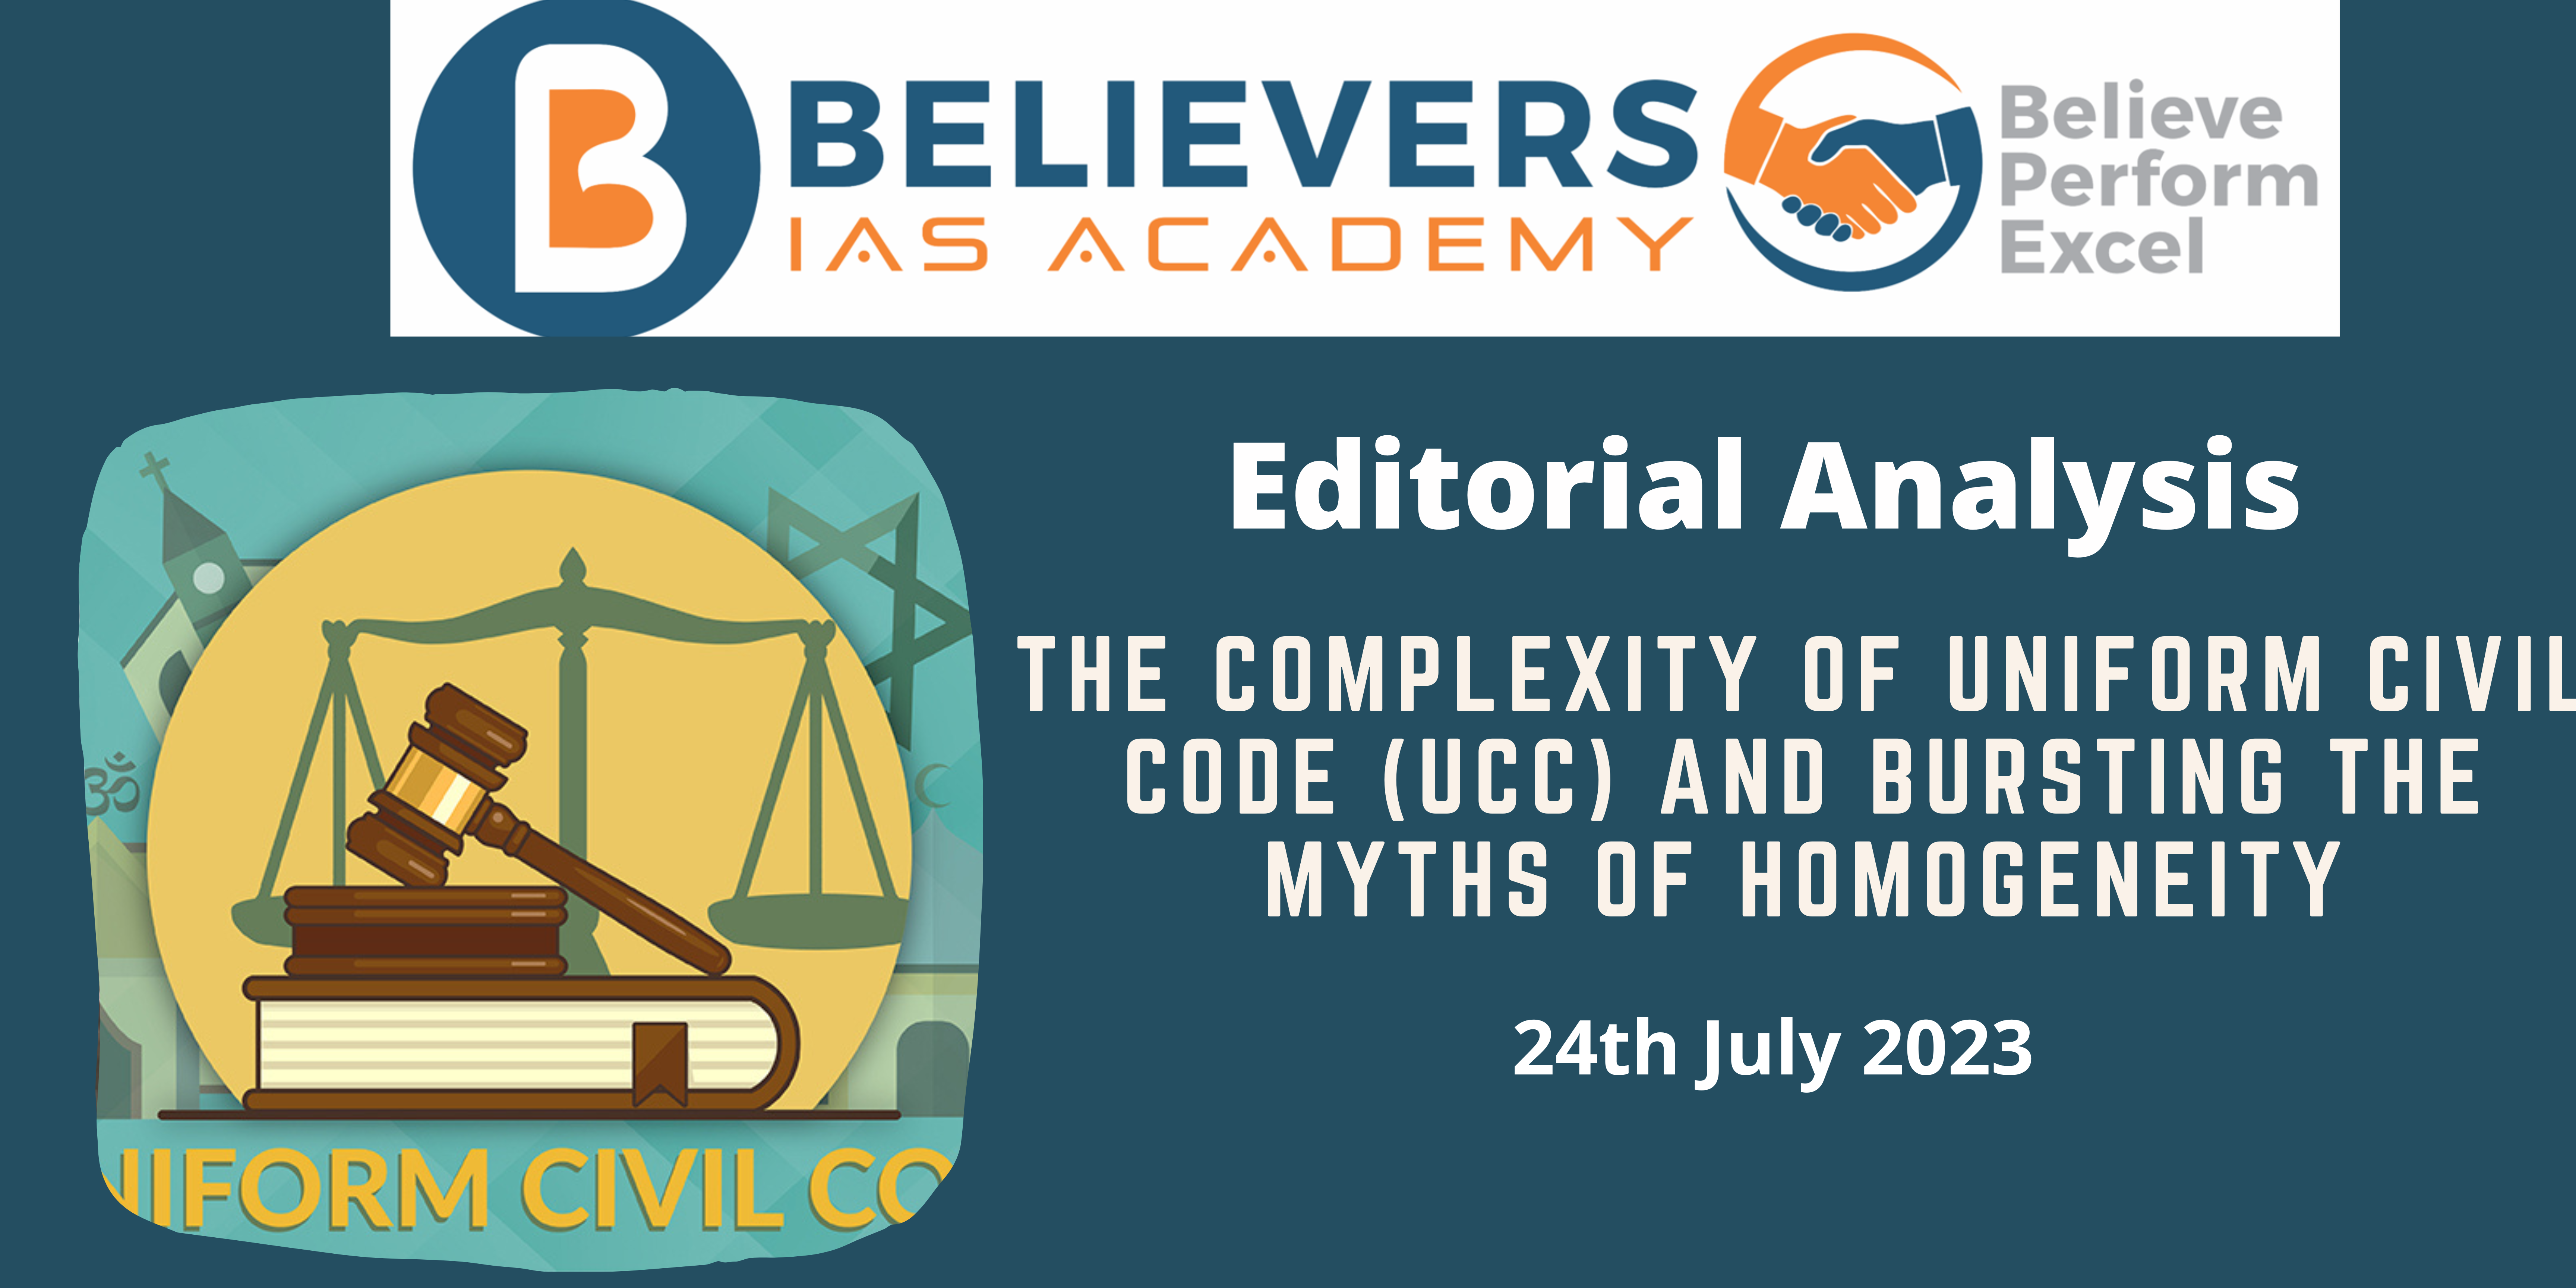 The Complexity of Uniform Civil Code (UCC) and Bursting the Myths of Homogeneity